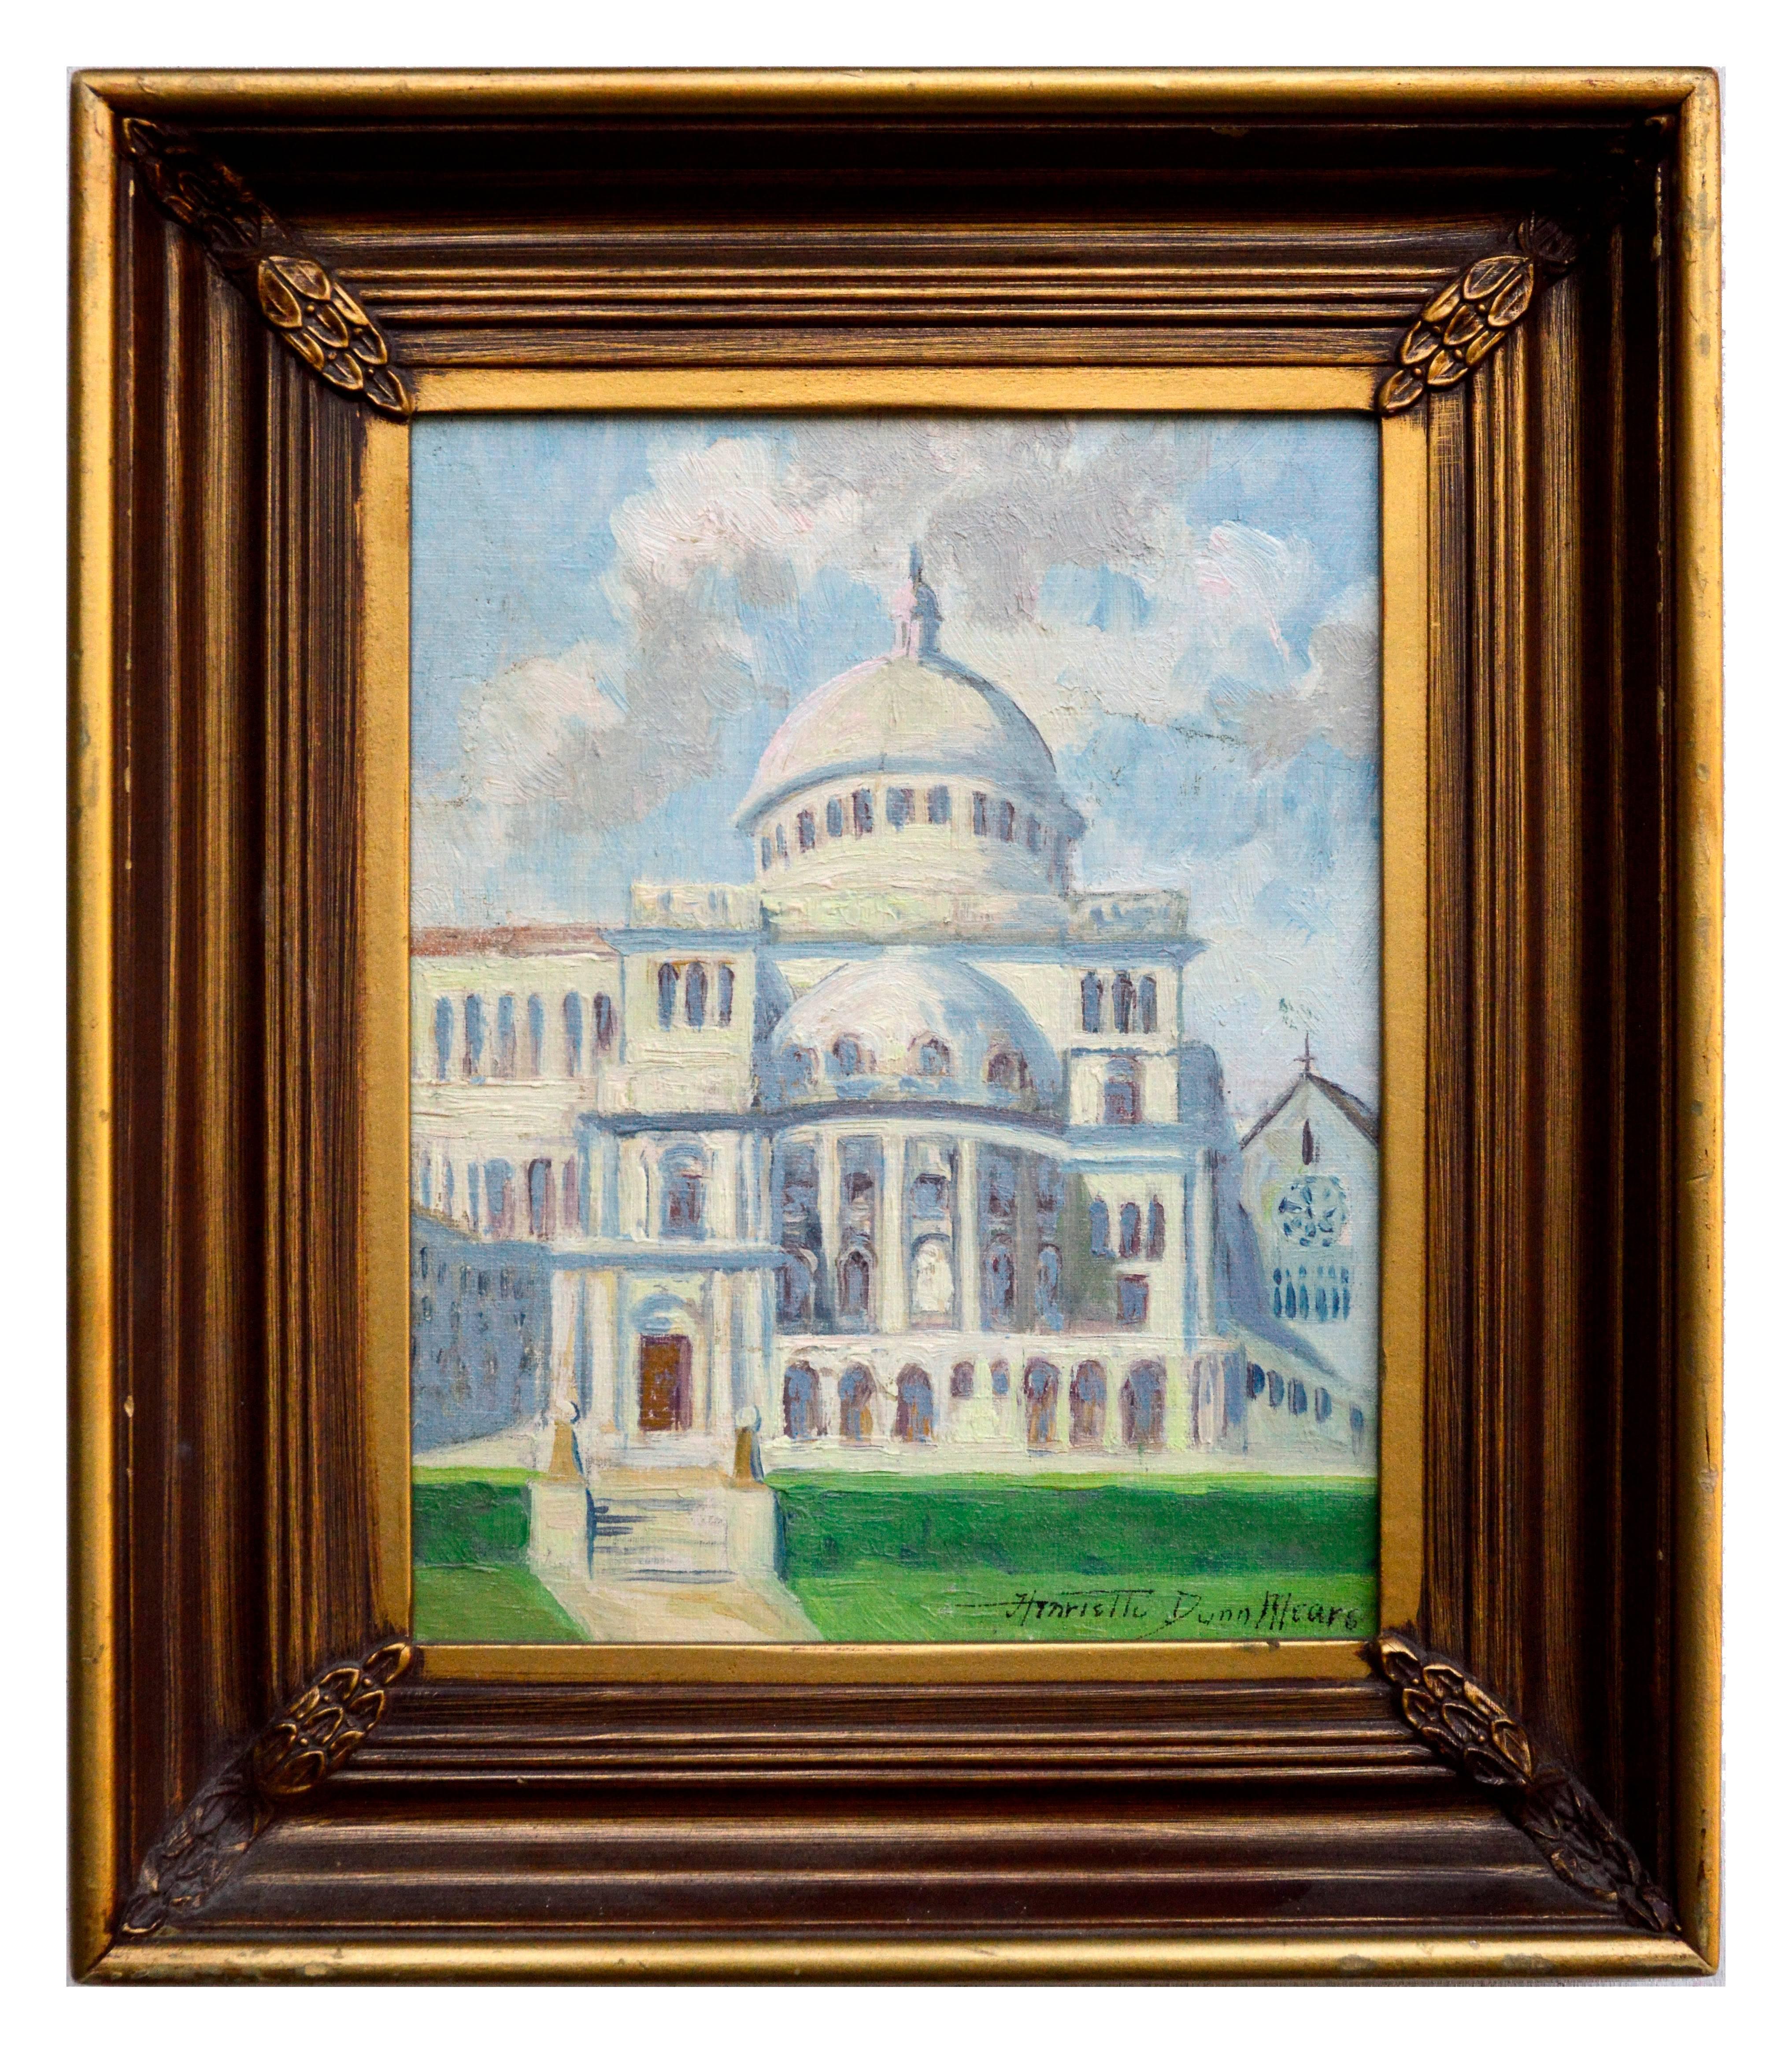 Henrietta Dunn Mears Landscape Painting - The First Church of Christ Scientist - Early 20th Century Boston Landscape 